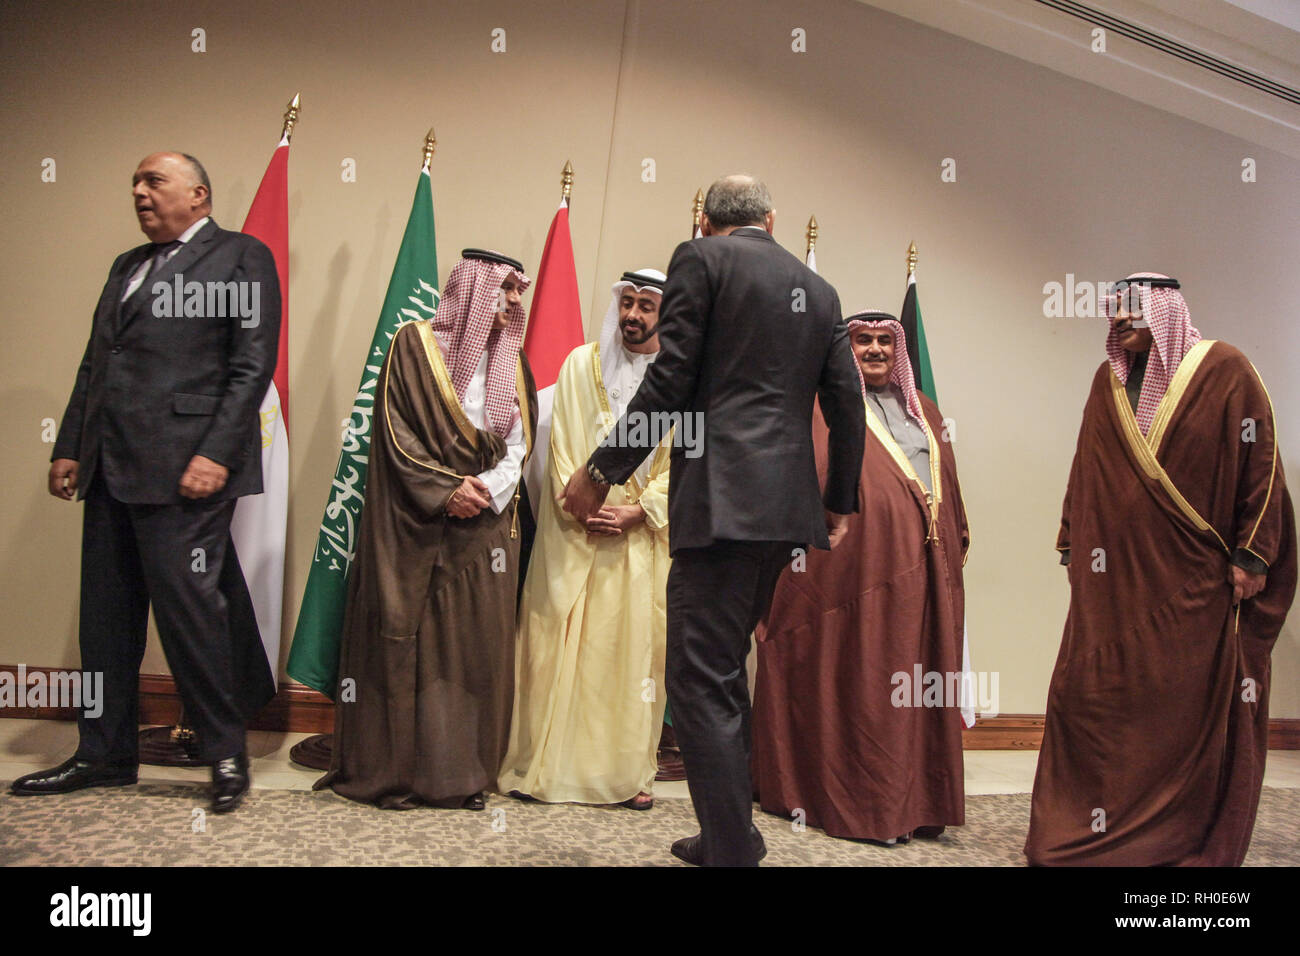 Dead Sea, Jordan. 31st Jan, 2019. Egyptian Foreign Minister Sameh Shoukry (L-R), Saudi Minister of State for Foreign Affairs Adel al-Jubeir, Emirati Foreign Minister Abdullah bin Zayed Al Nahyan, Jordanian Foreign Minister Ayman Safadi, Bahraini Foreign Minister Khalid bin Ahmed al-Khalifa and Kuwaiti foreign minister Sheikh Sabah al-Khaled al-Sabah, leave after a group picture during the Arab's Foreign Ministerial Consultative Meeting at the King Hussein Convention Centre at the Dead Sea. Credit: Ahmad Abdo/dpa/Alamy Live News Stock Photo